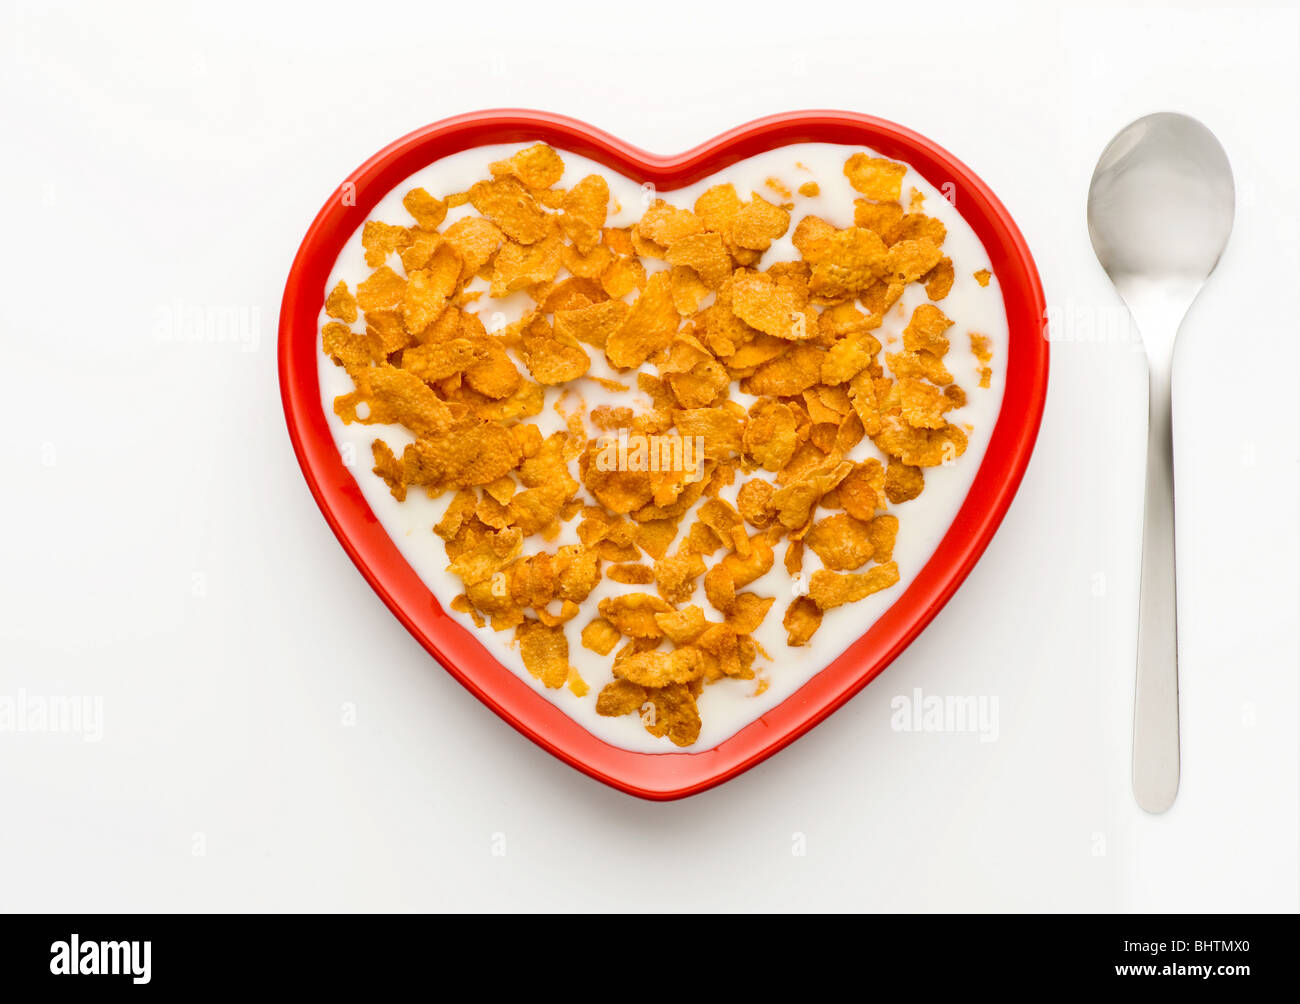 Studio shot of red heart shaped bowl of corn flakes and milk on a white background, shot from above. Stock Photo